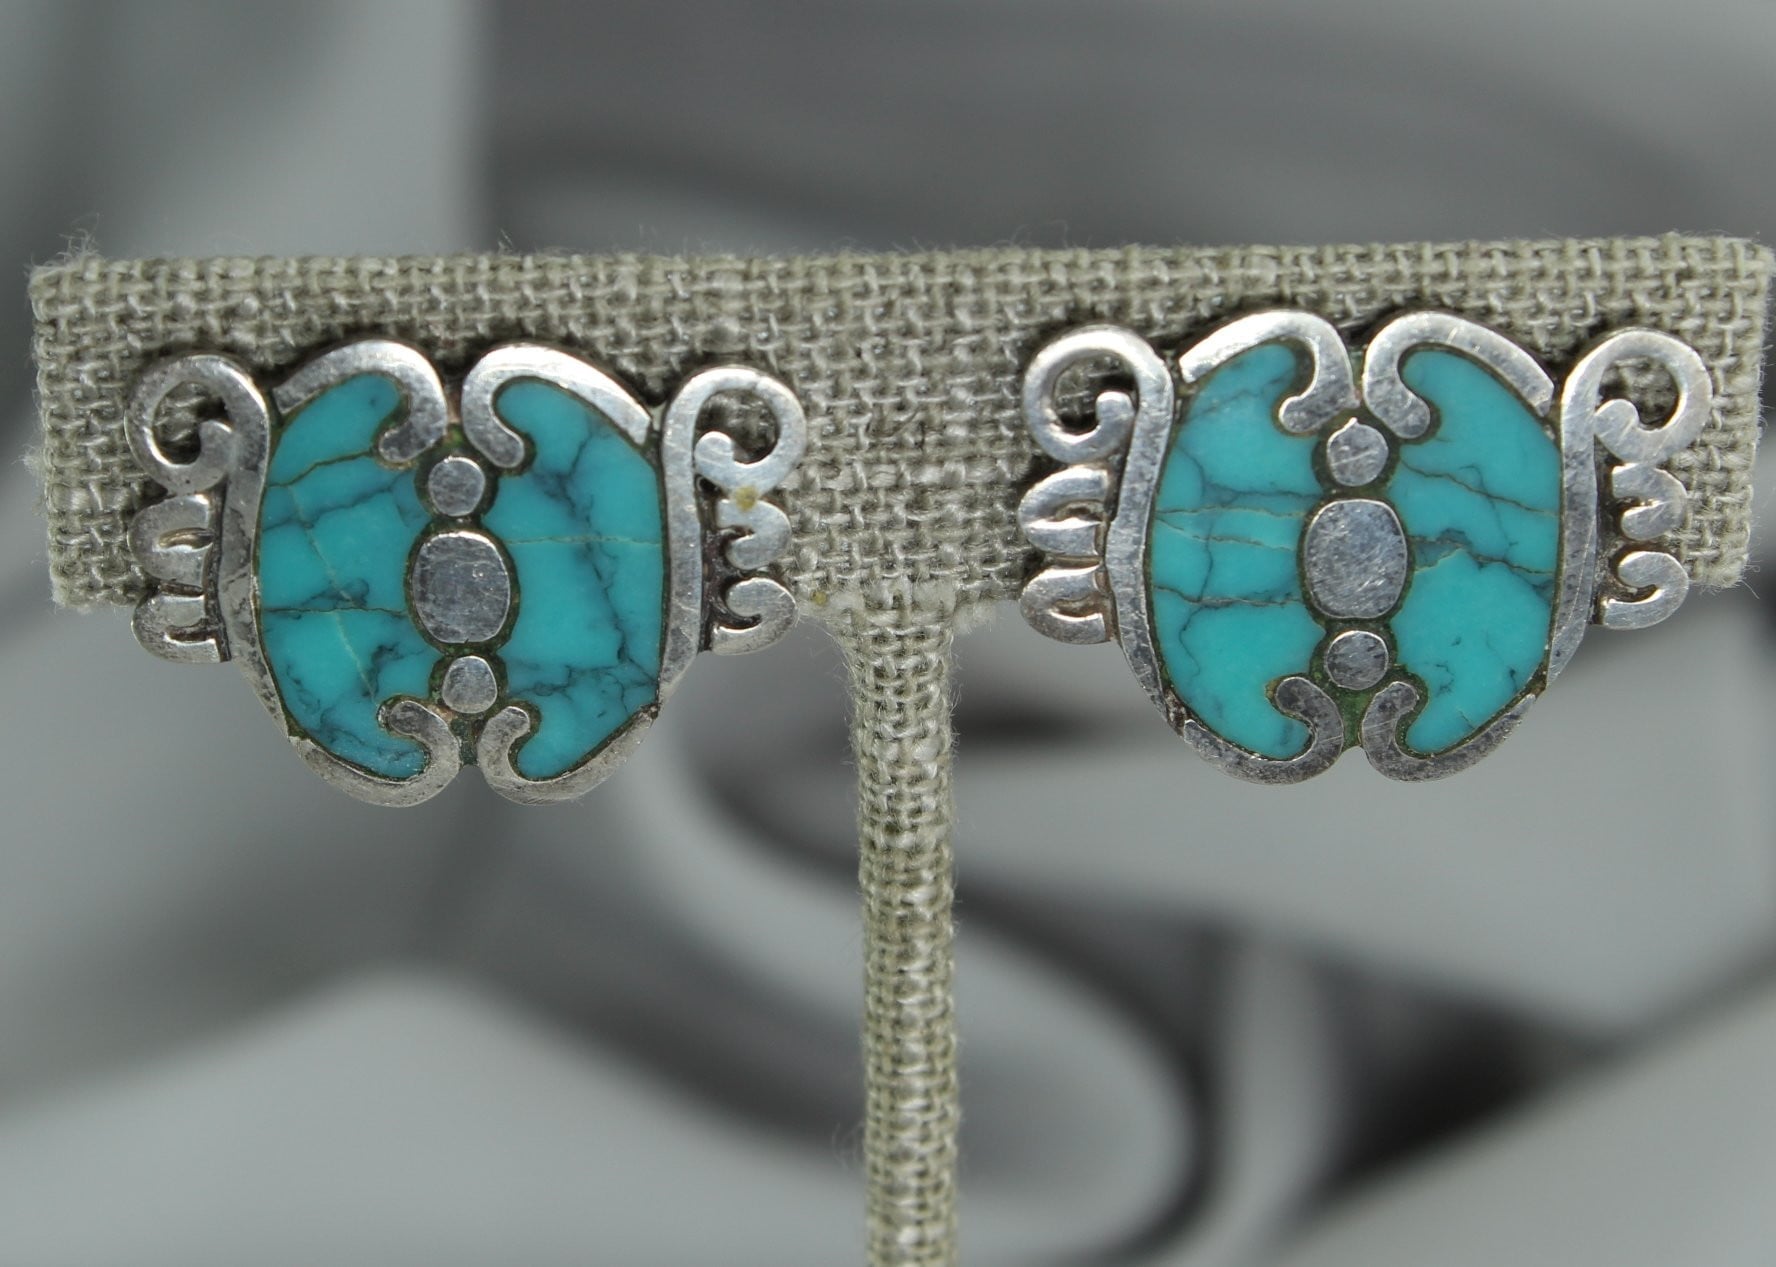 VintageTurquoise Earrings Sterling MR 580 Eagle 3 Flat Inlay Screw Finding collectible